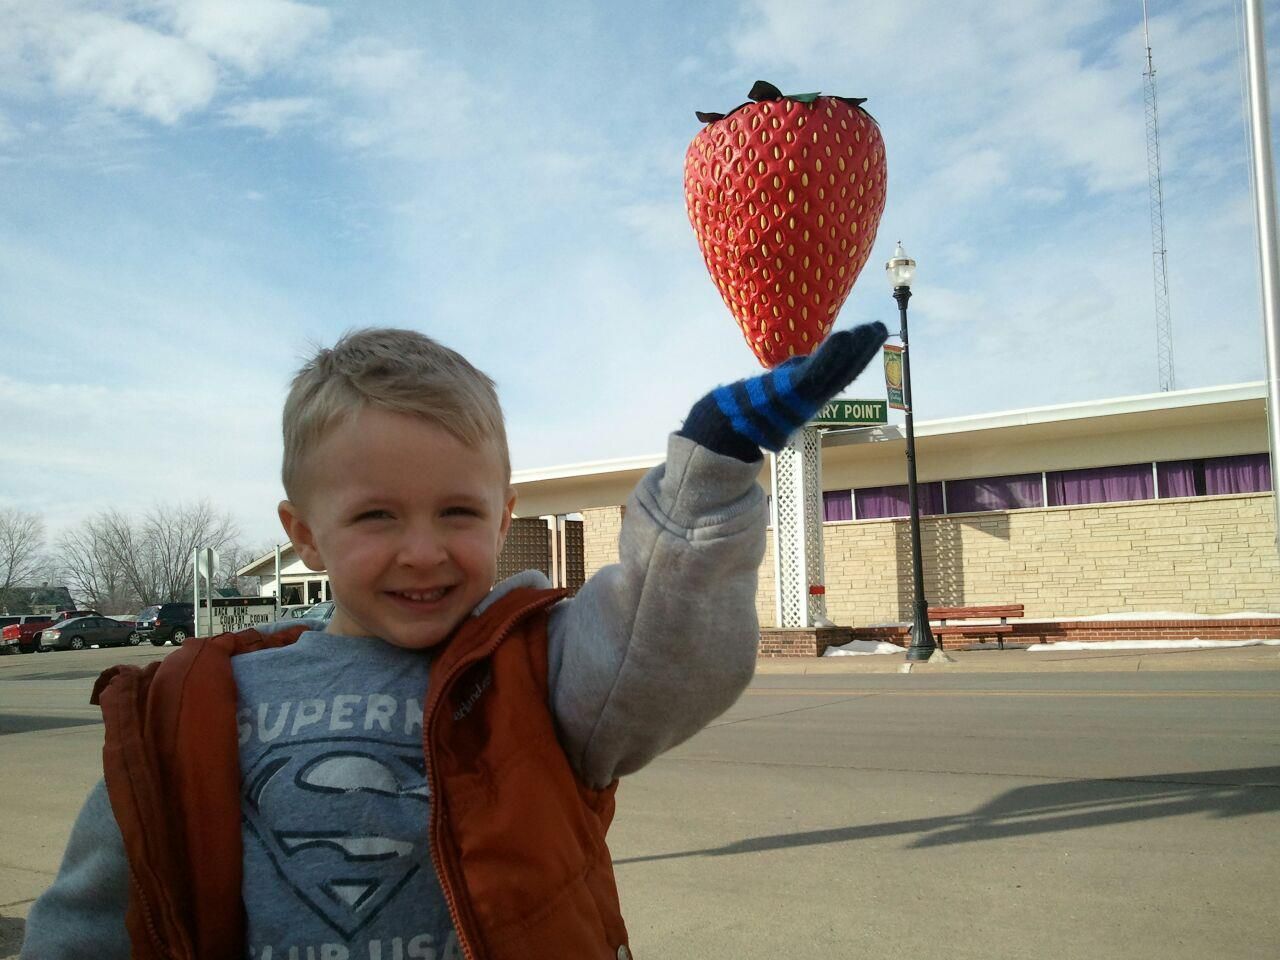 
World’s Largest Strawberry Sculpture: world record in Strawberry Point, Iowa